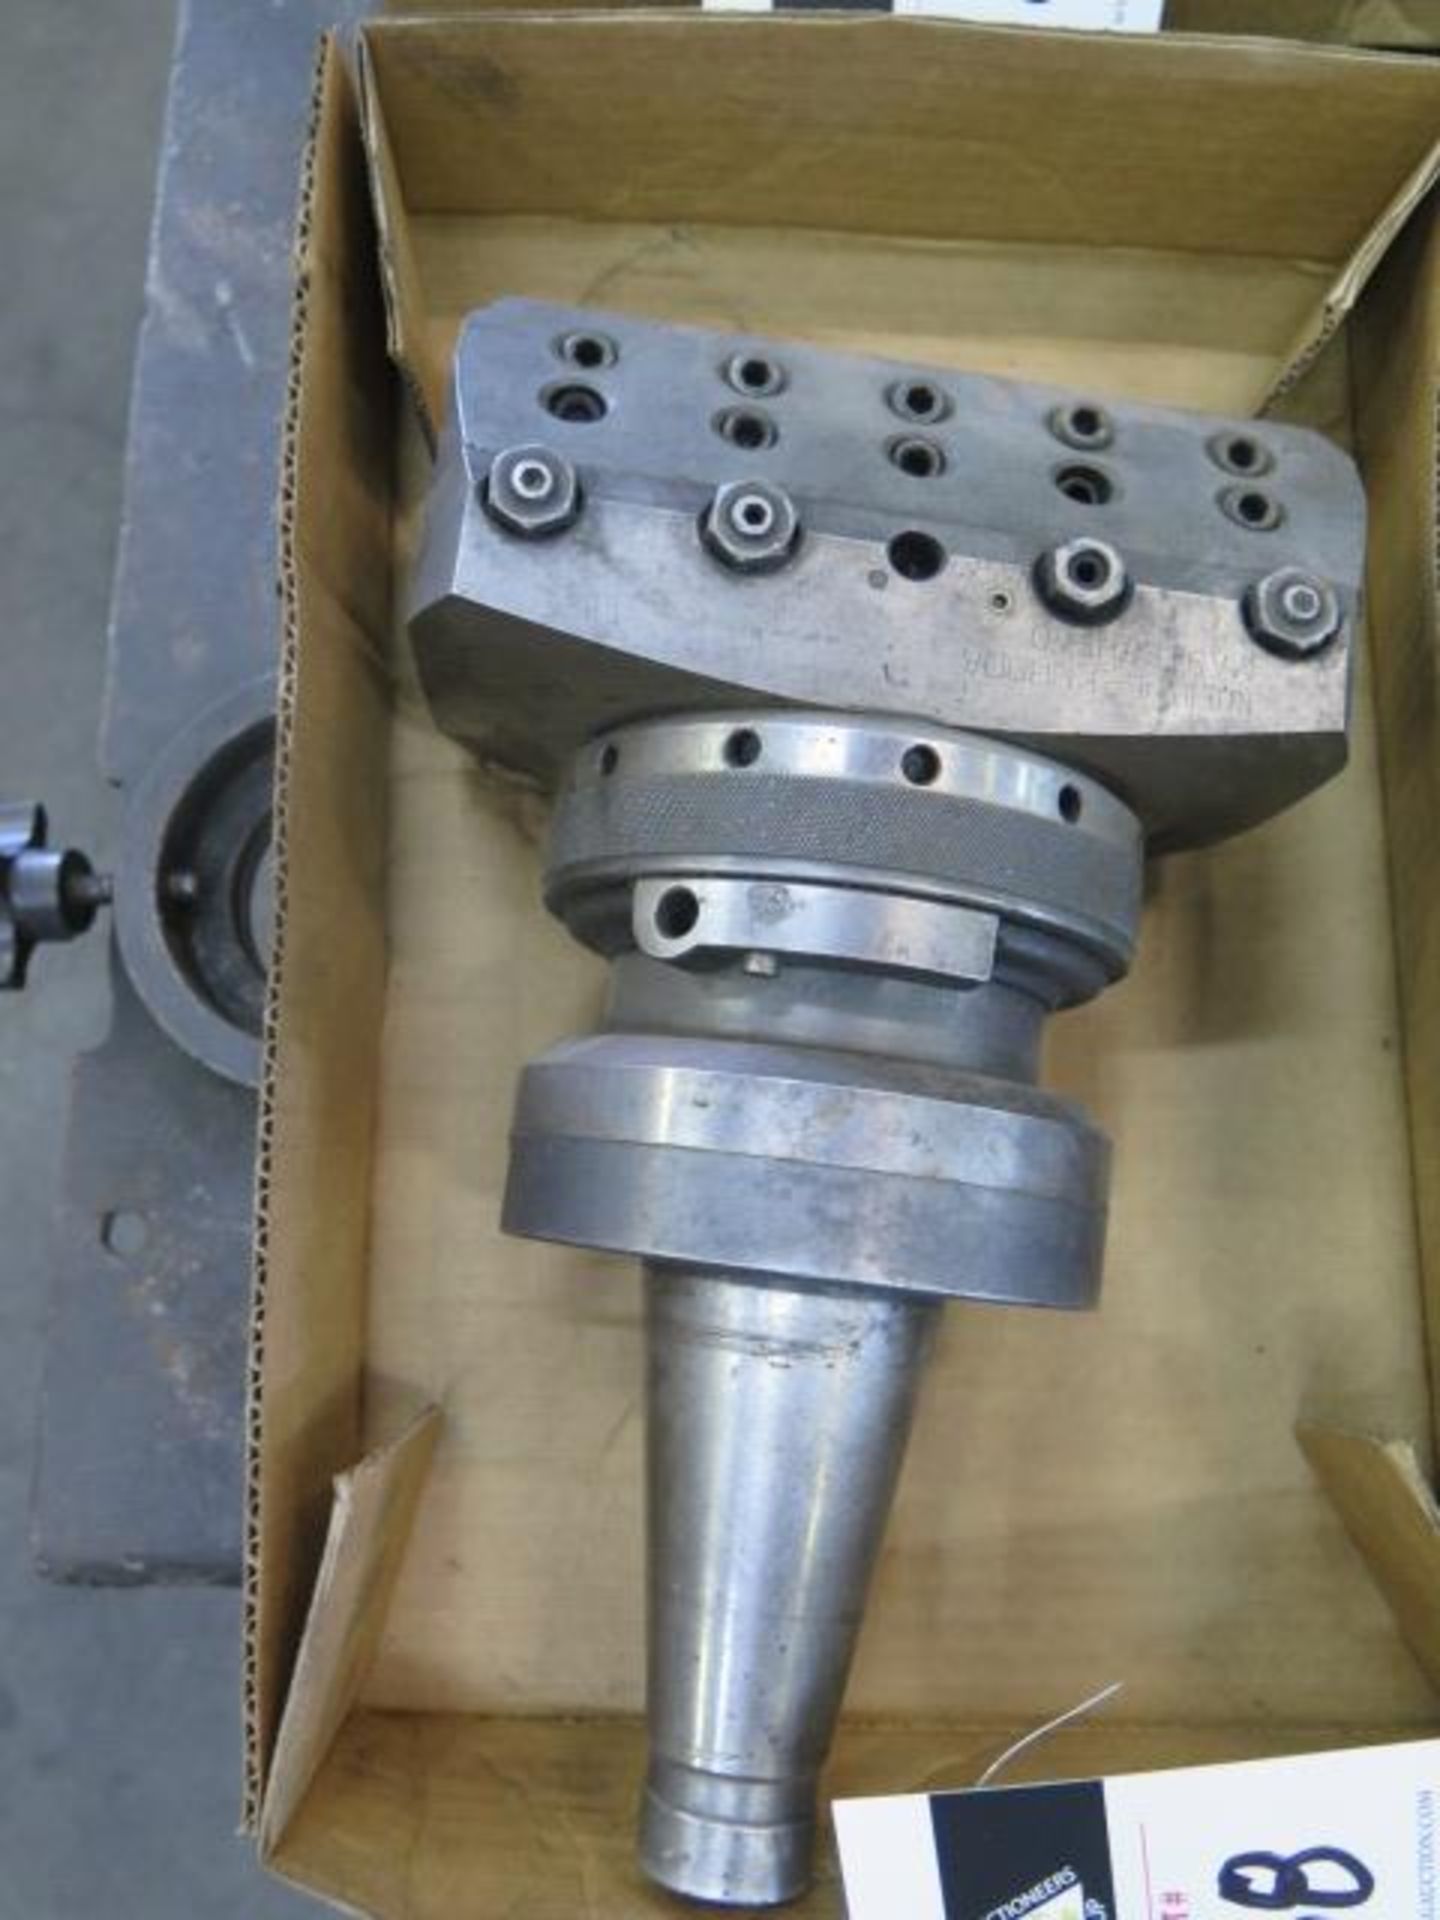 Wohlhaupter Boring/Facing Head w/ 50-Taper Mount (SOLD AS-IS - NO WARRANTY) - Image 2 of 7